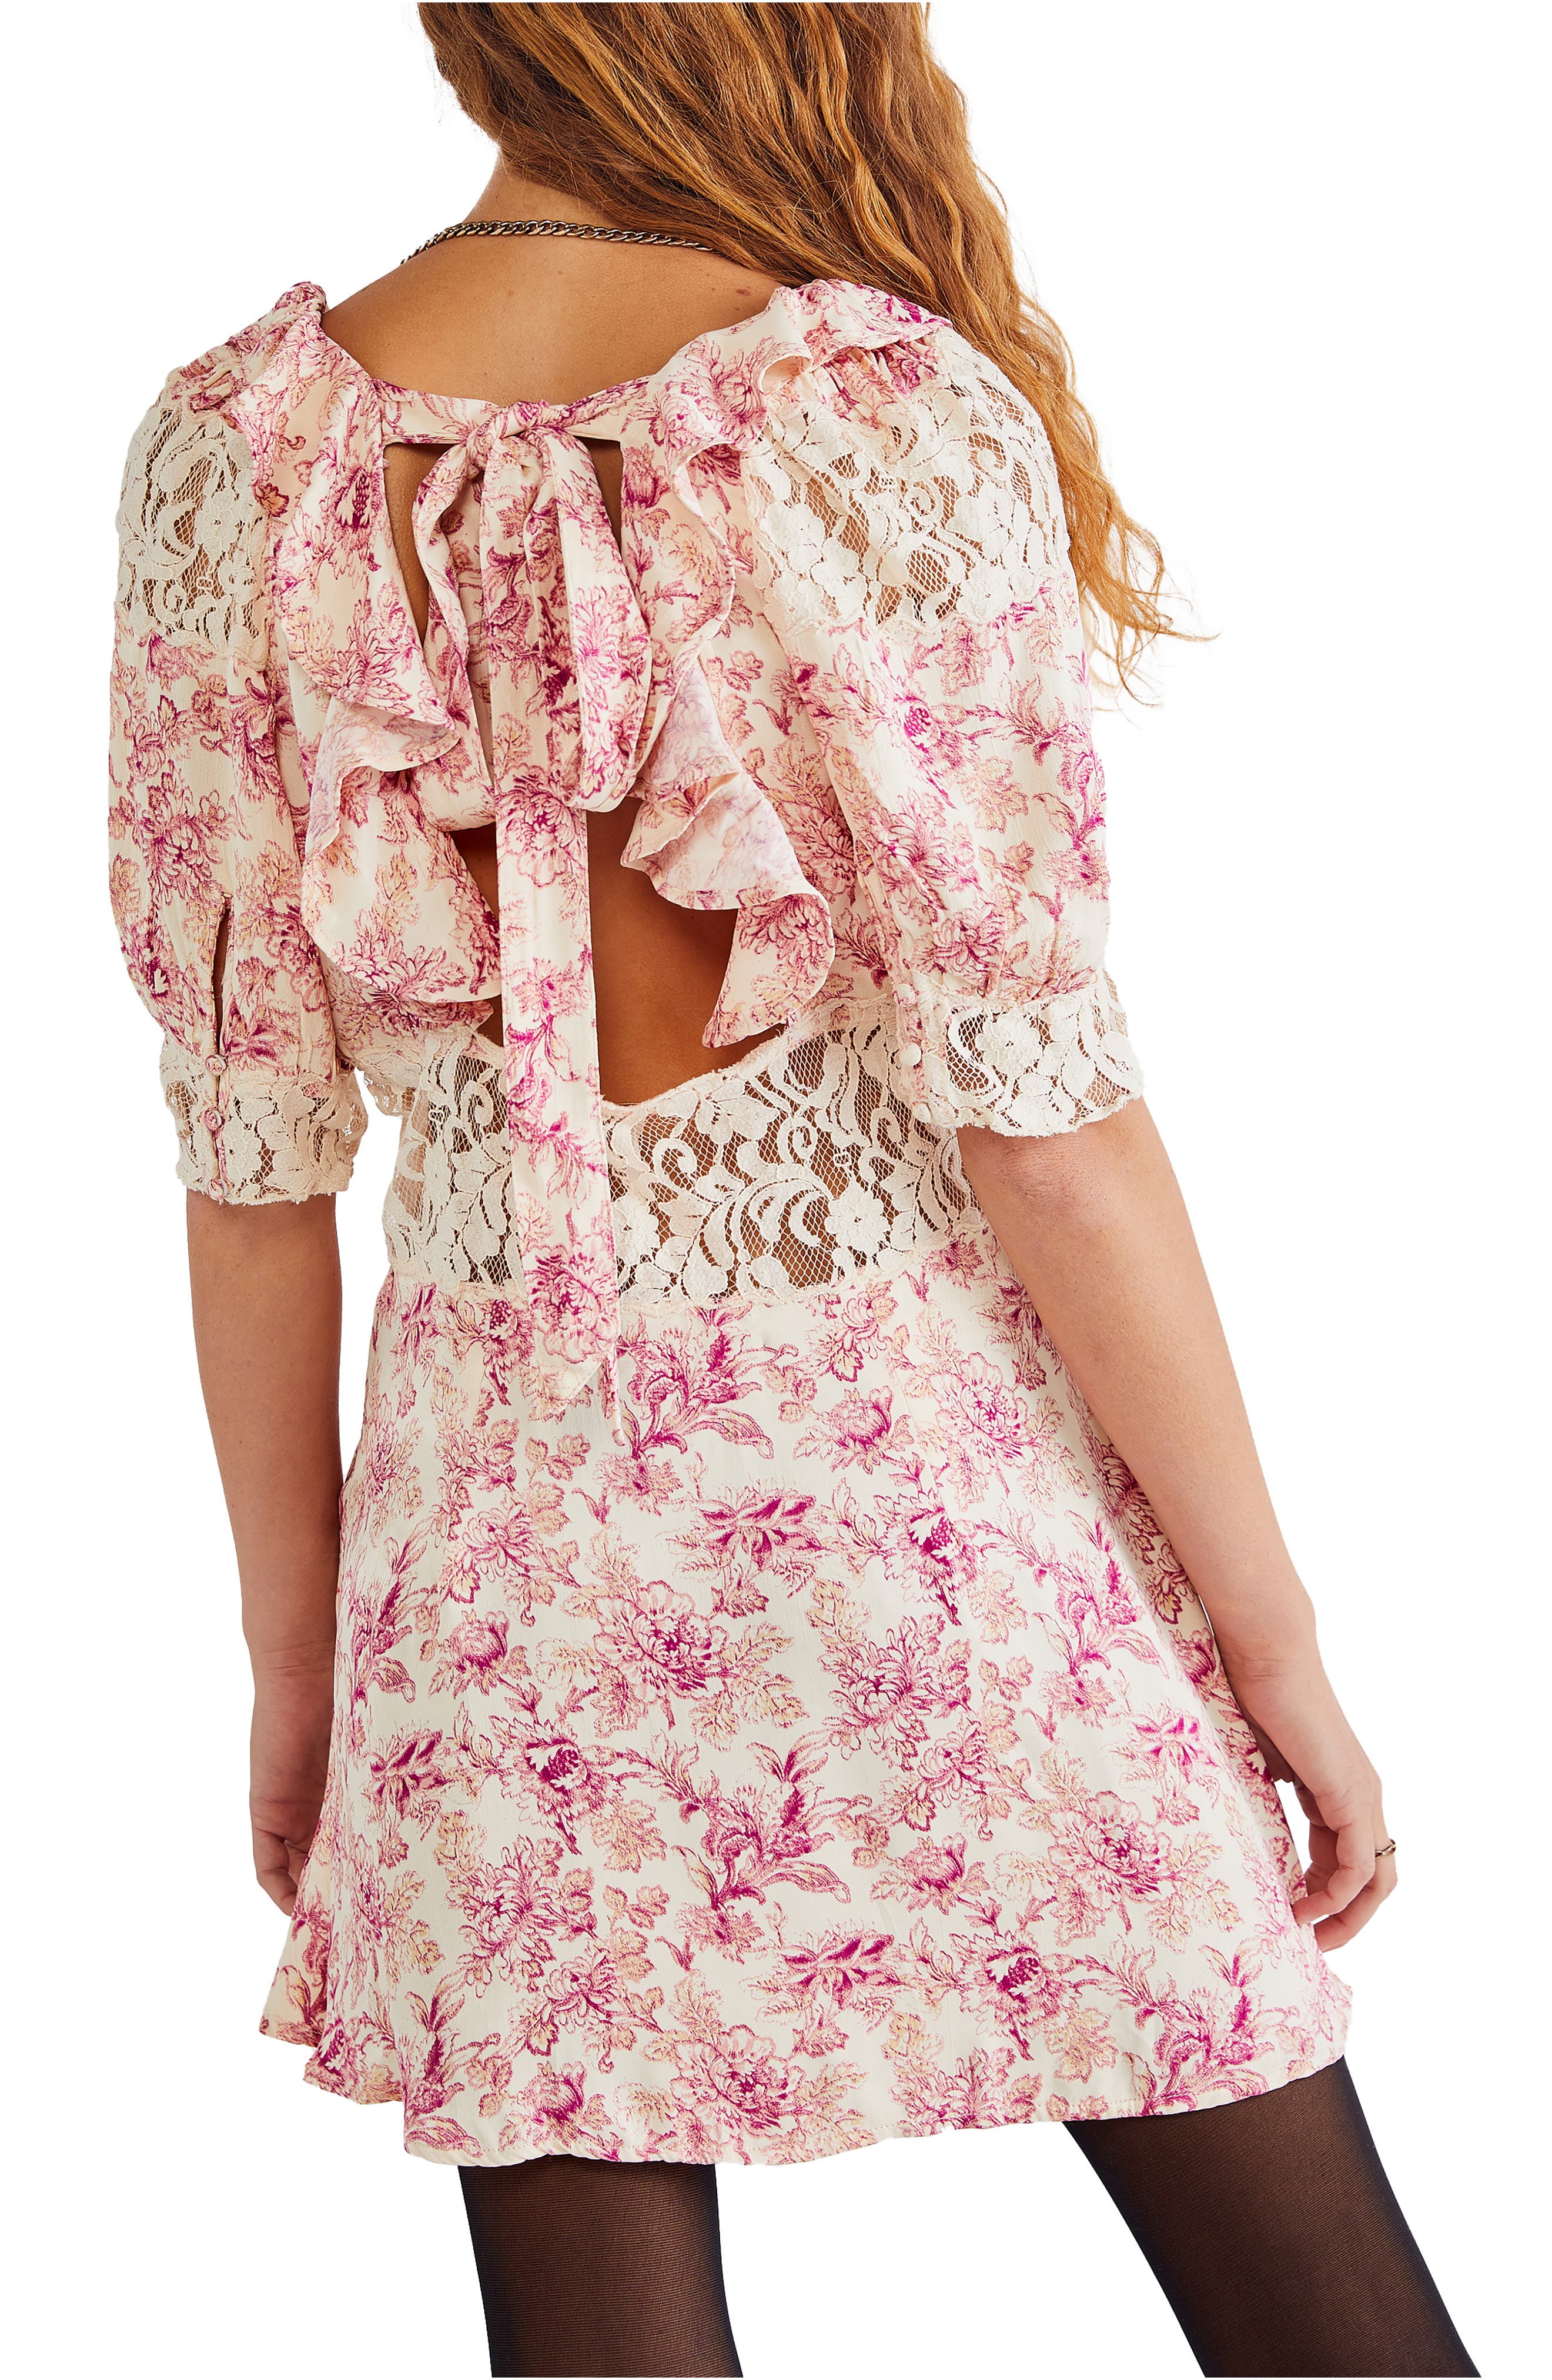 Free People Lucie Minidress | Nordstrom